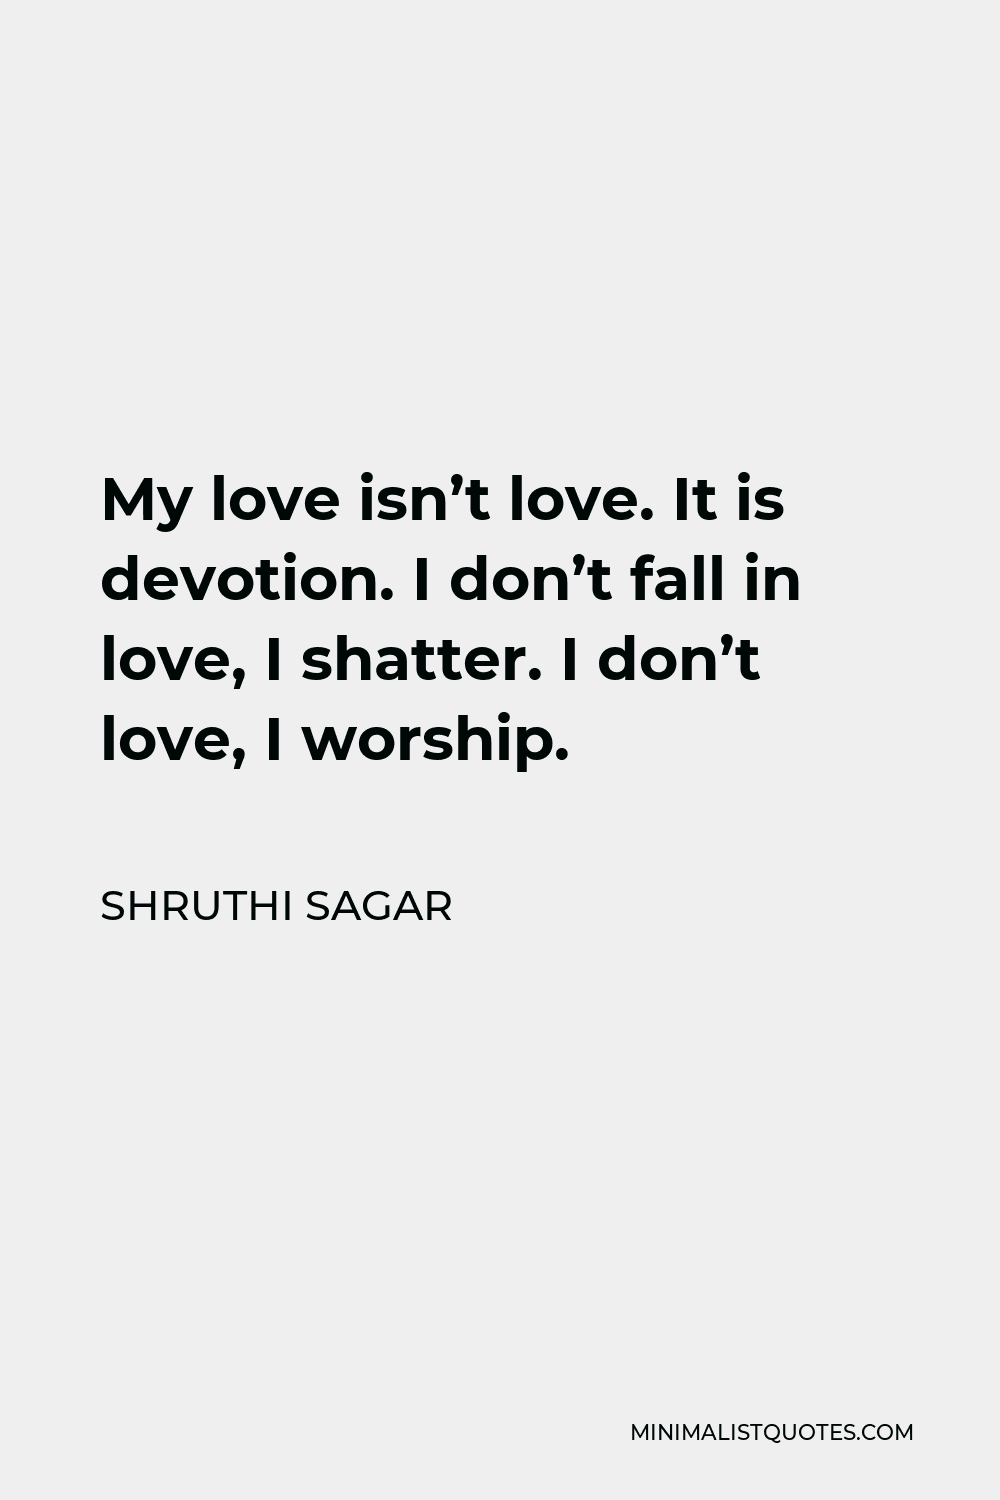 Shruthi Sagar Quote - My love isn’t love. It is devotion. I don’t fall in love, I shatter. I don’t love, I worship.